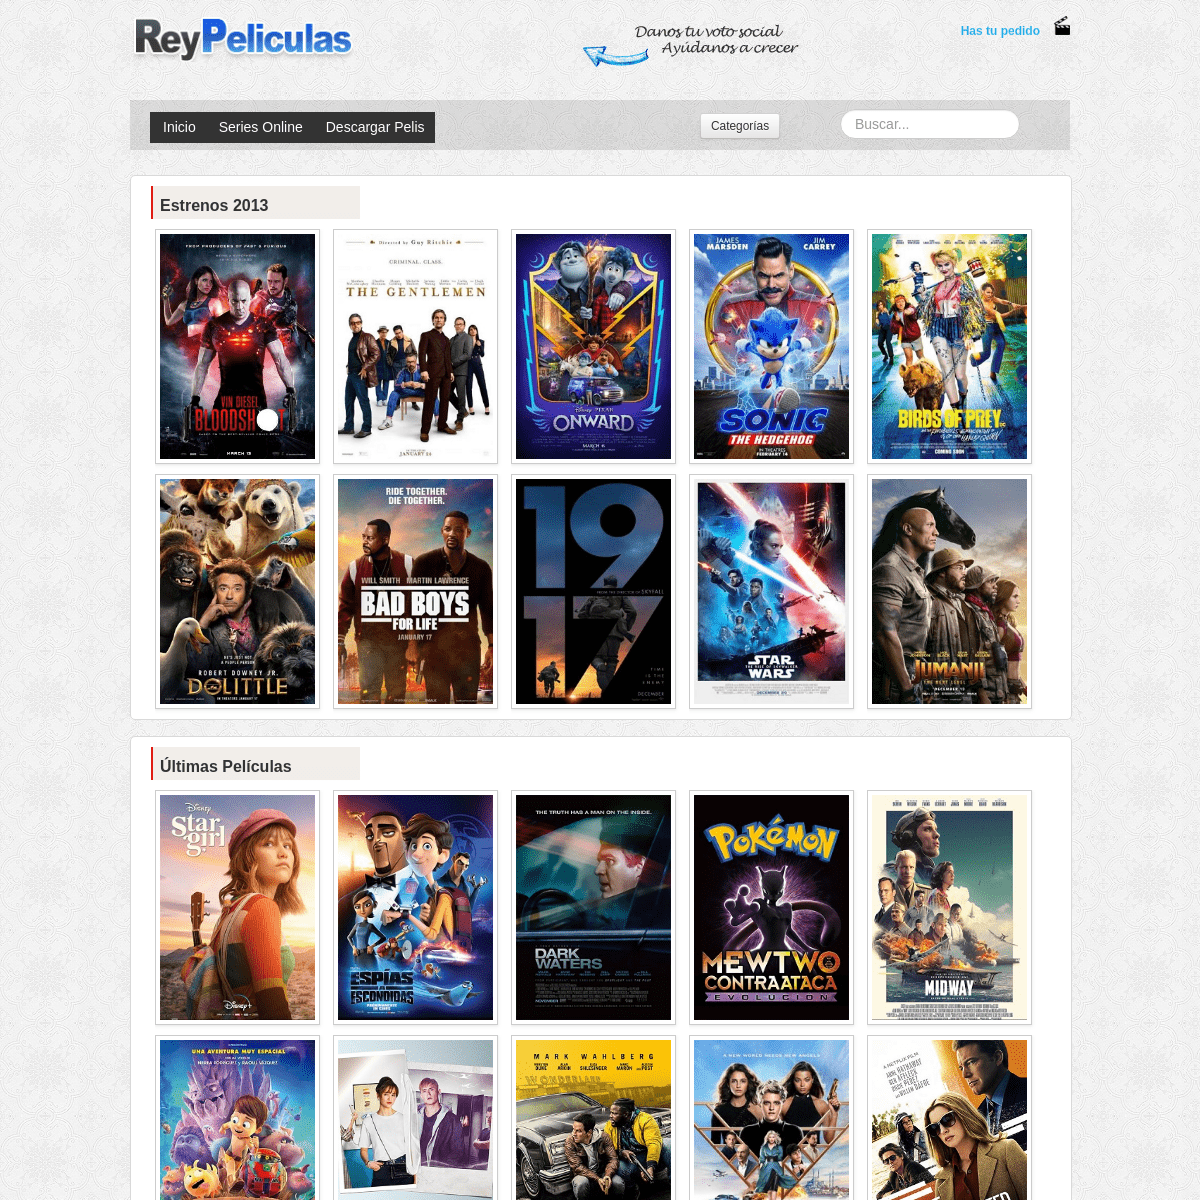 A complete backup of reypeliculas.com